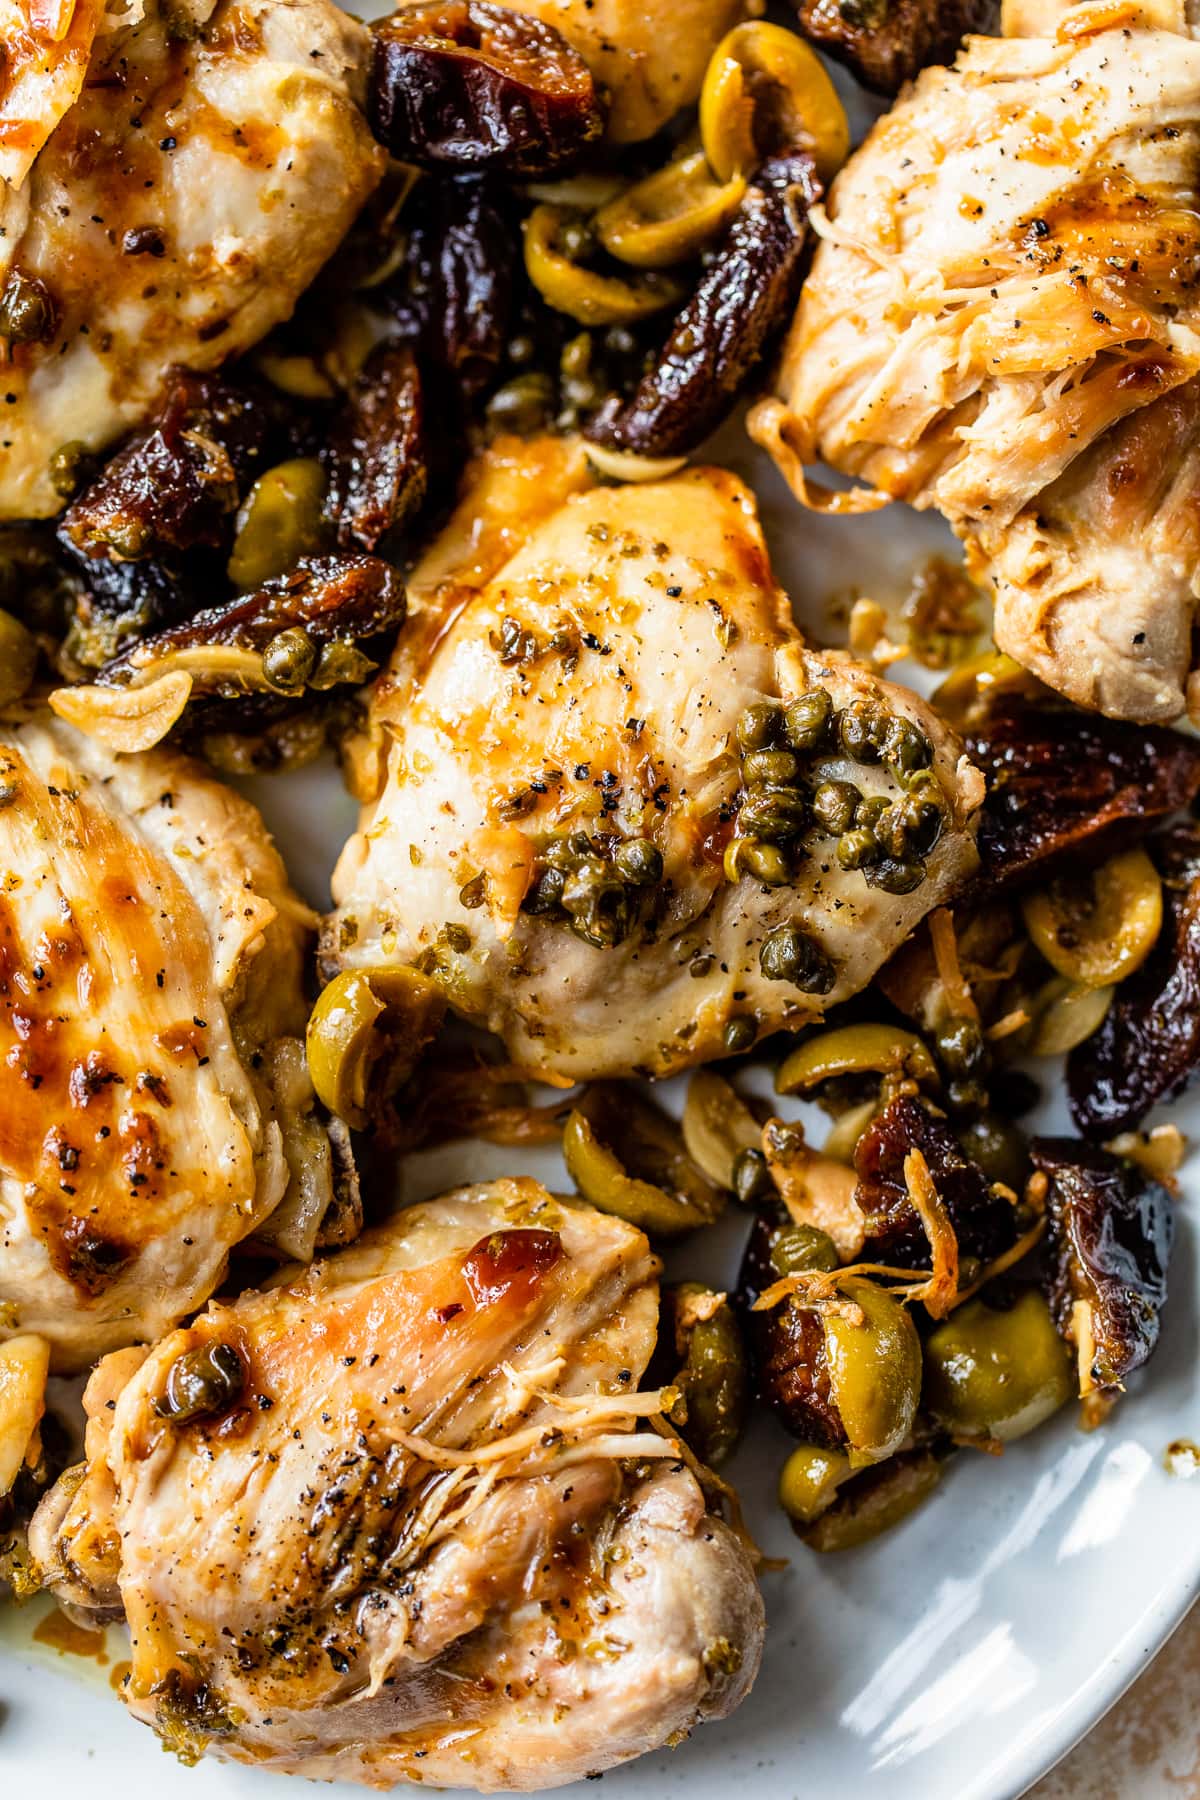 Chicken thighs, prunes and olives